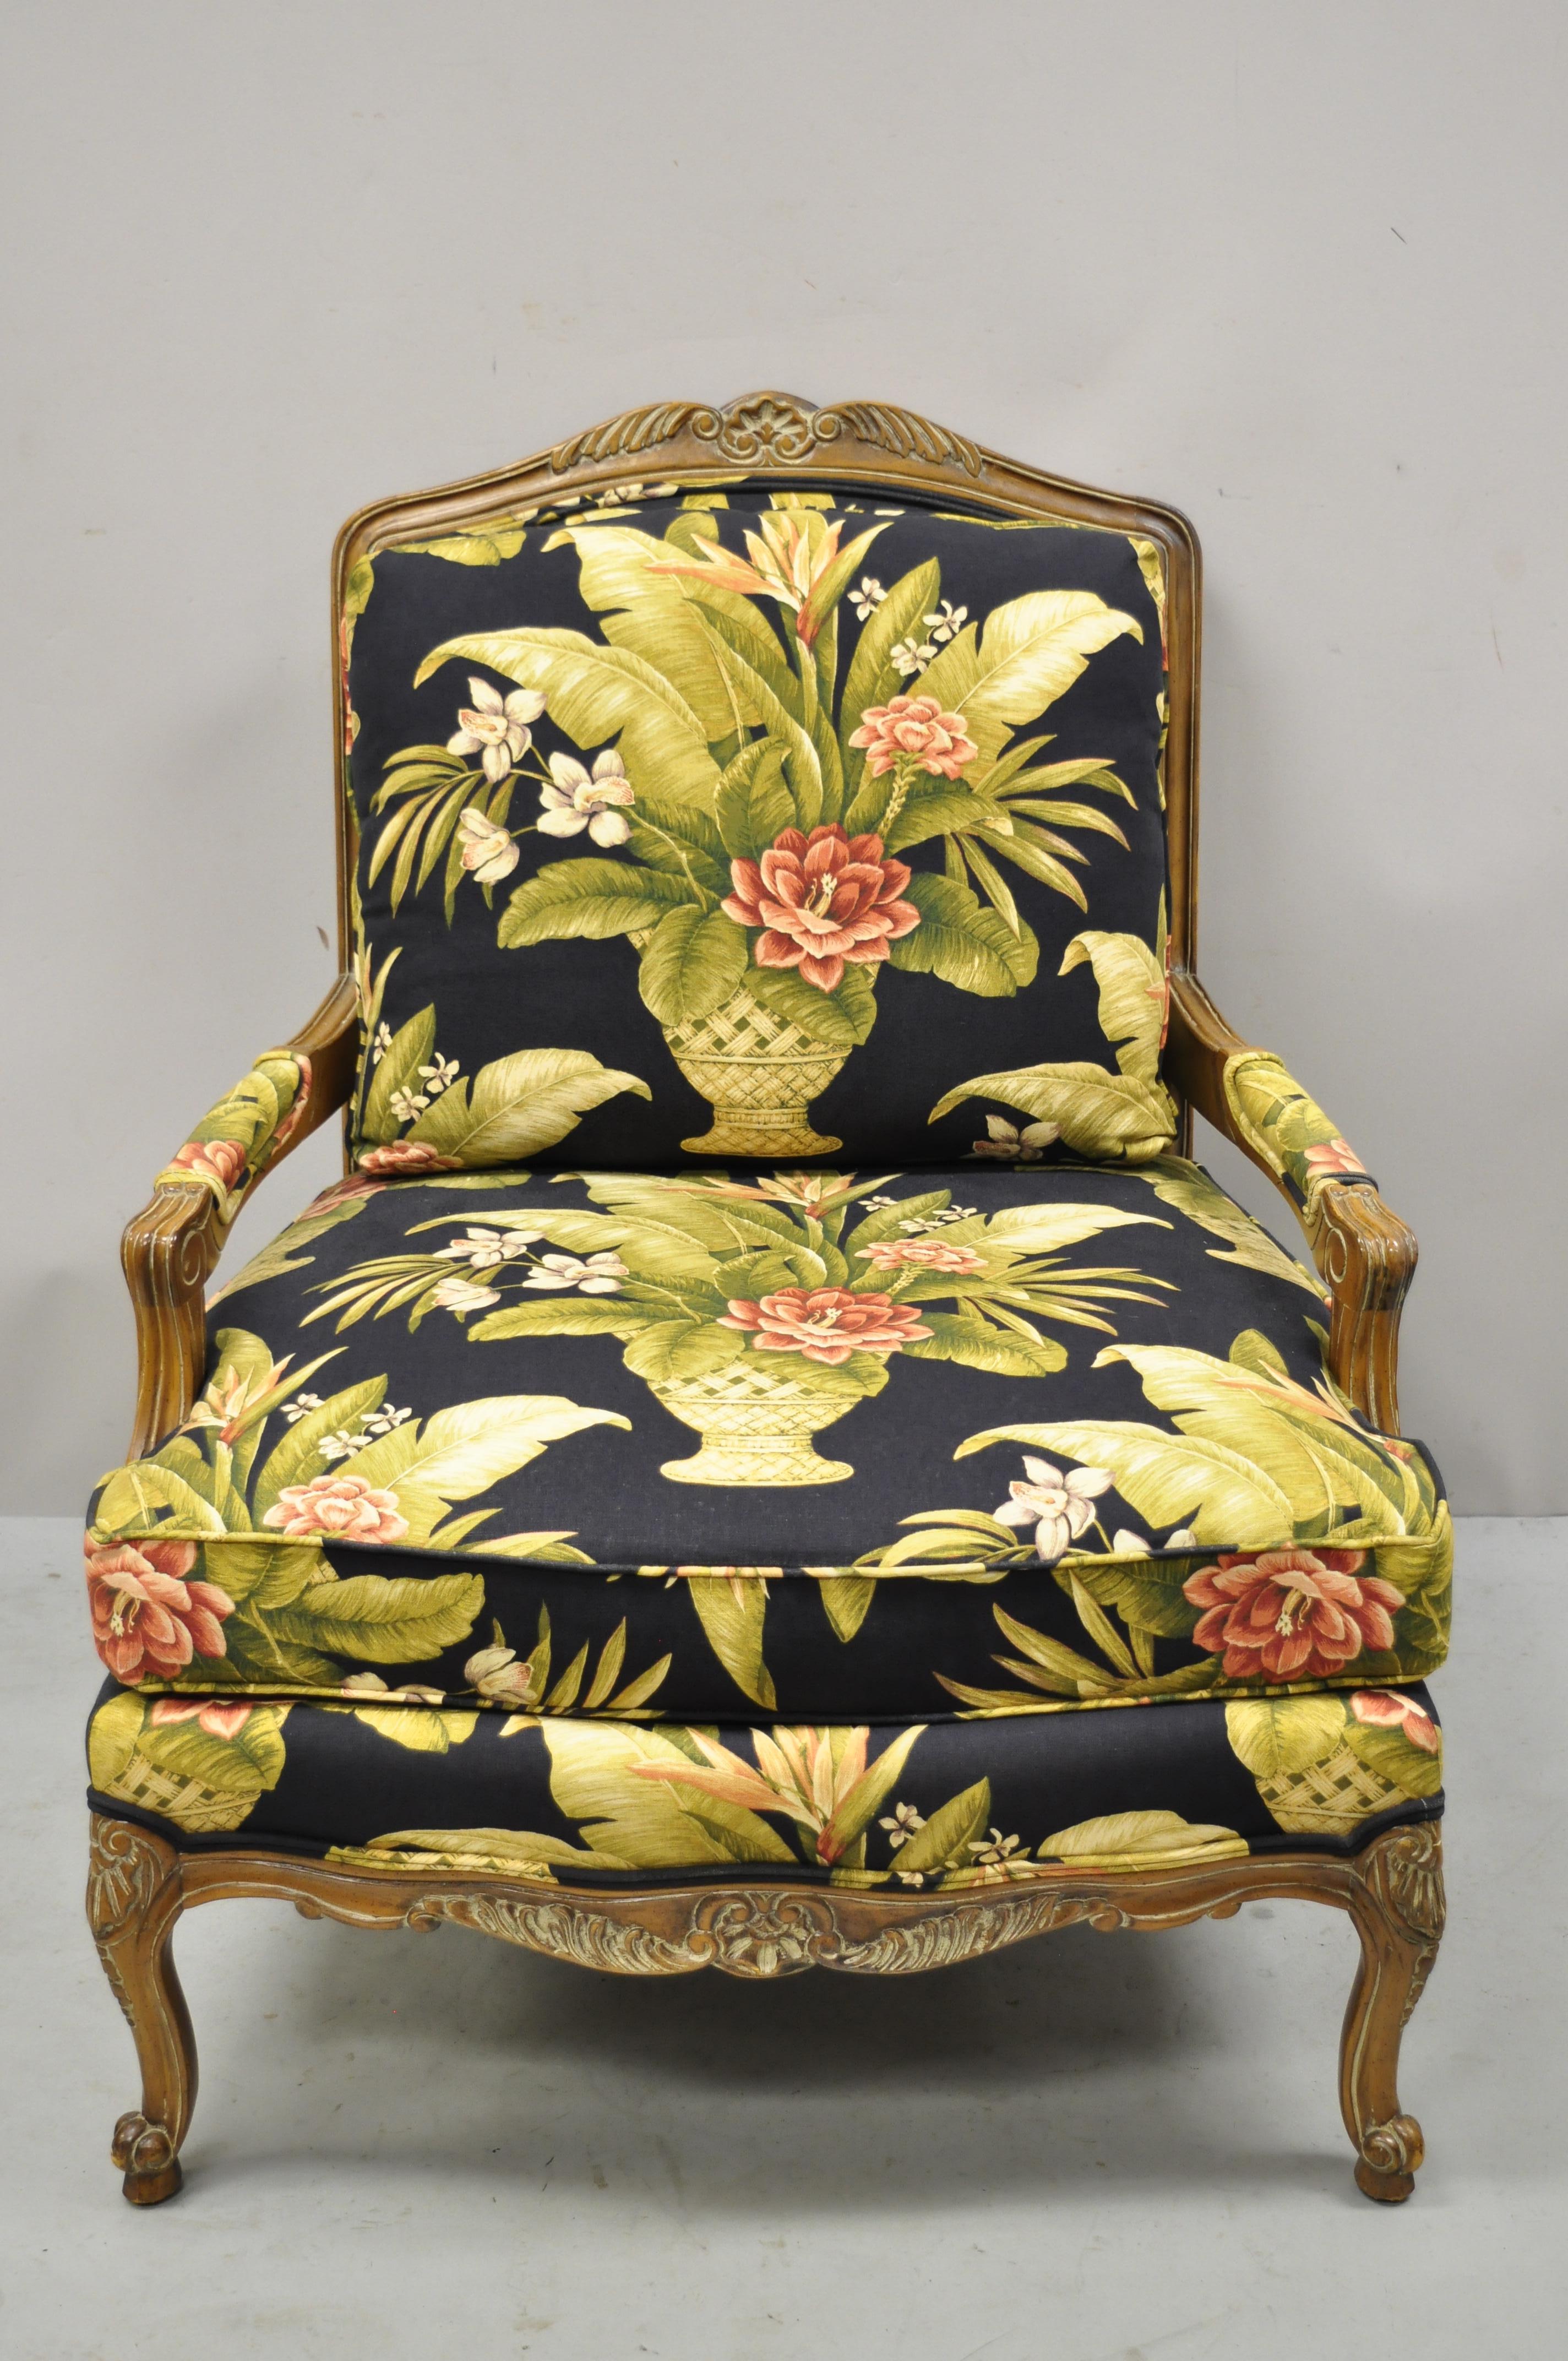 Thomasville French Provincial Louis XV navy blue green bergere lounge arm chair. Item features navy blue floral printed fabric, solid wood frame, beautiful wood grain, upholstered arm rests, distressed finish, nicely carved details, cabriole legs,